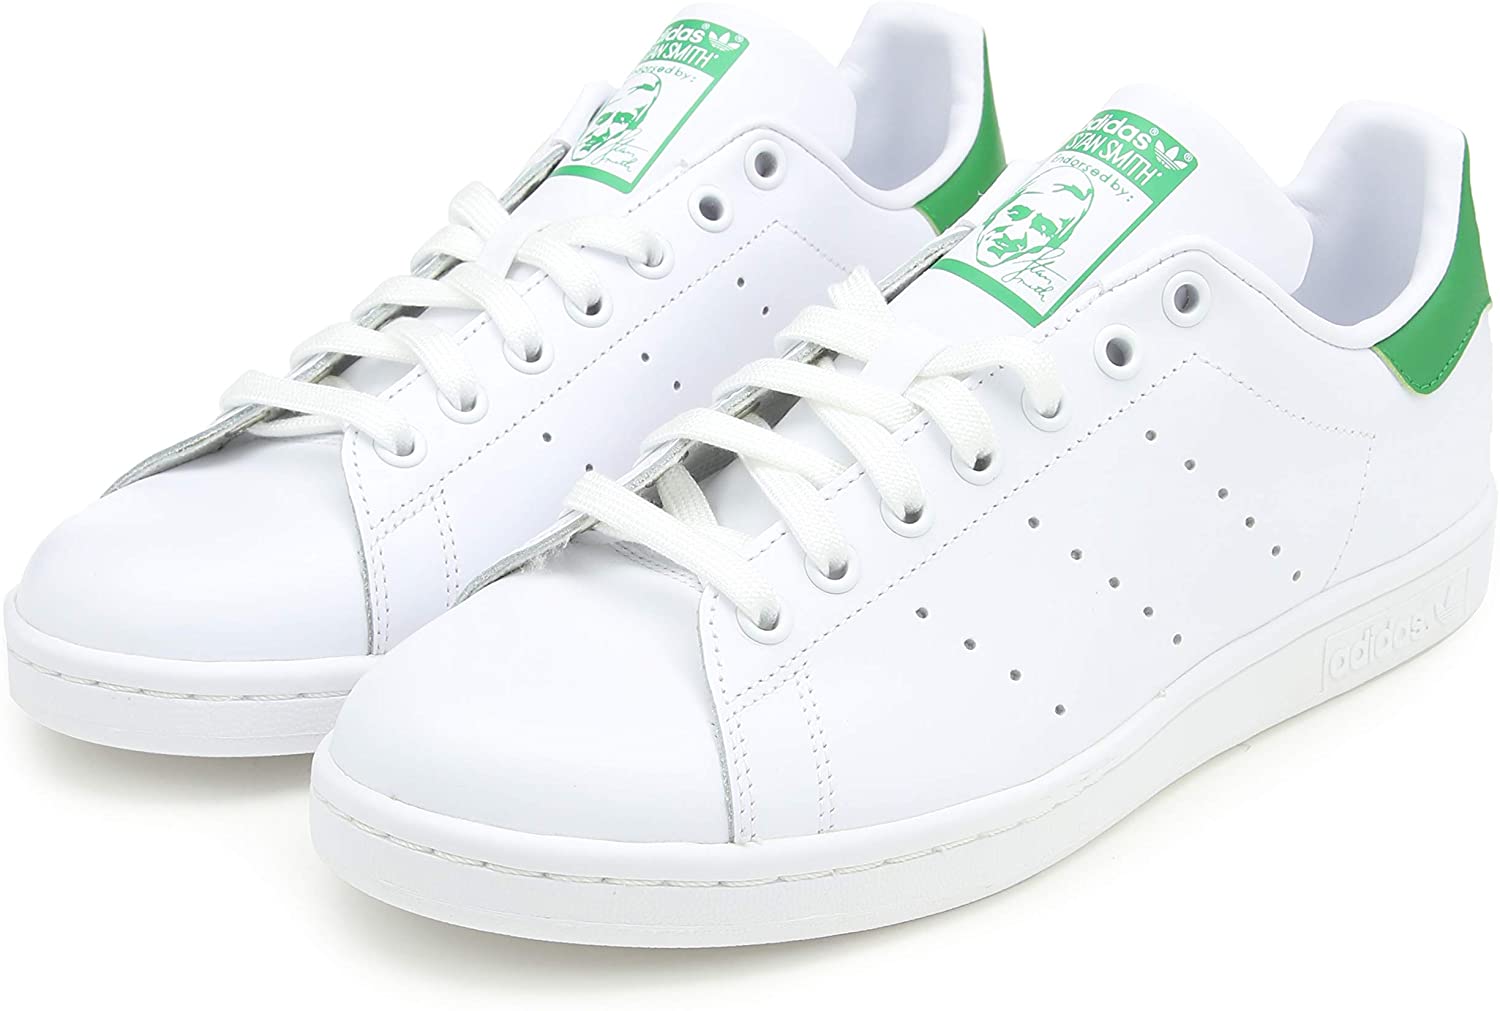 Adidas Mens Stan Smith Low Top Lace Up Fashion Sneakers, Green, Size 6. ...